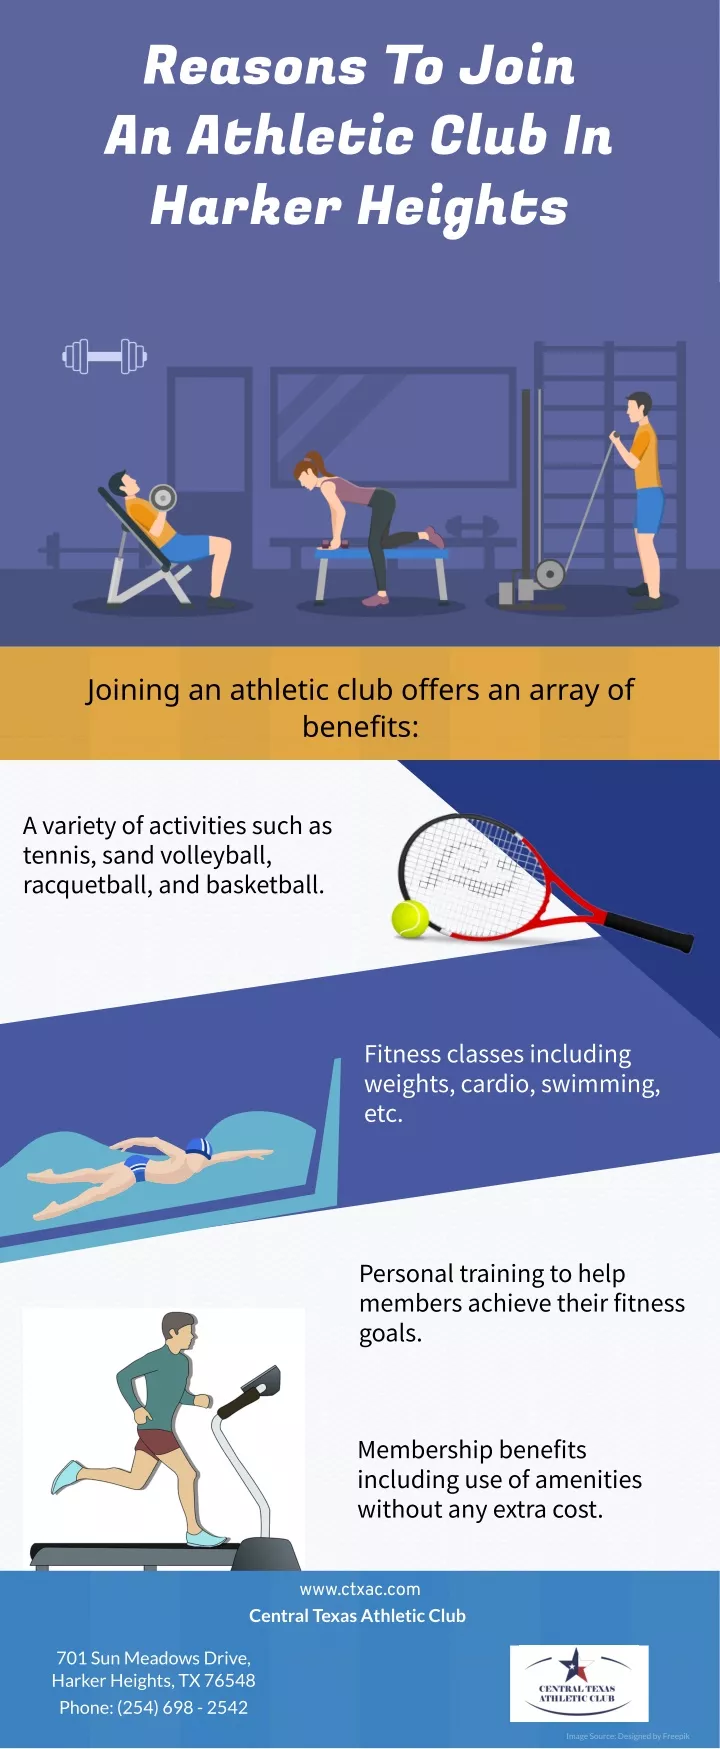 reasons to join an athletic club in harker heights